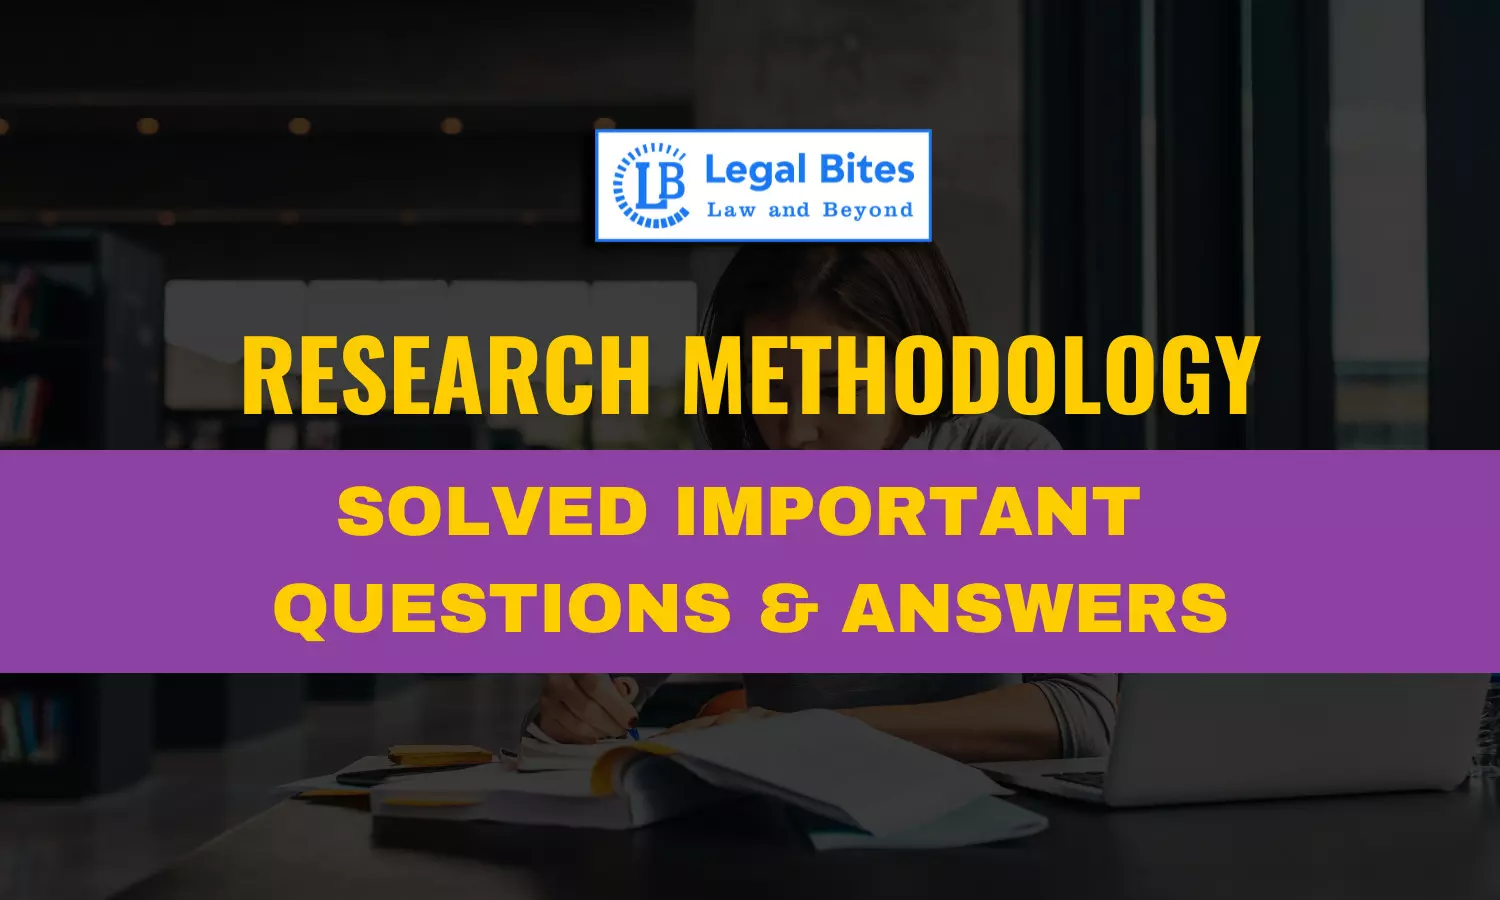 Write a brief note on the problems faced by a law researcher who wishes to write Thesis in Vernacular. Give Suggestions.